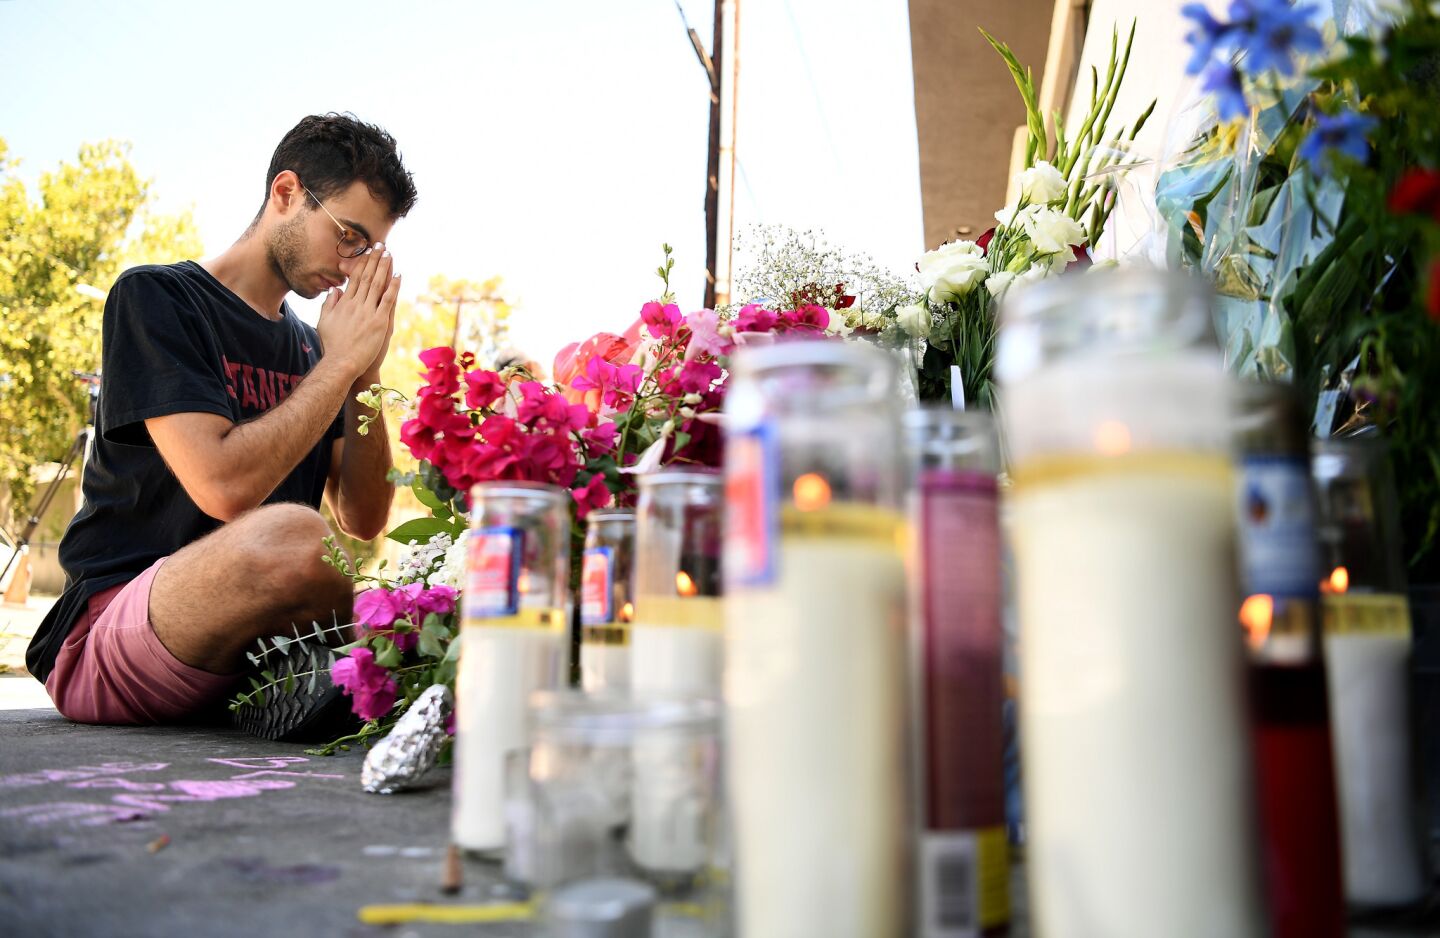 Paolo Singer, 27, of Silver Lake prays at a memorial outside of Trader Joe's in Silver Lake, where a shooting left one woman dead and at least two wounded Saturday.